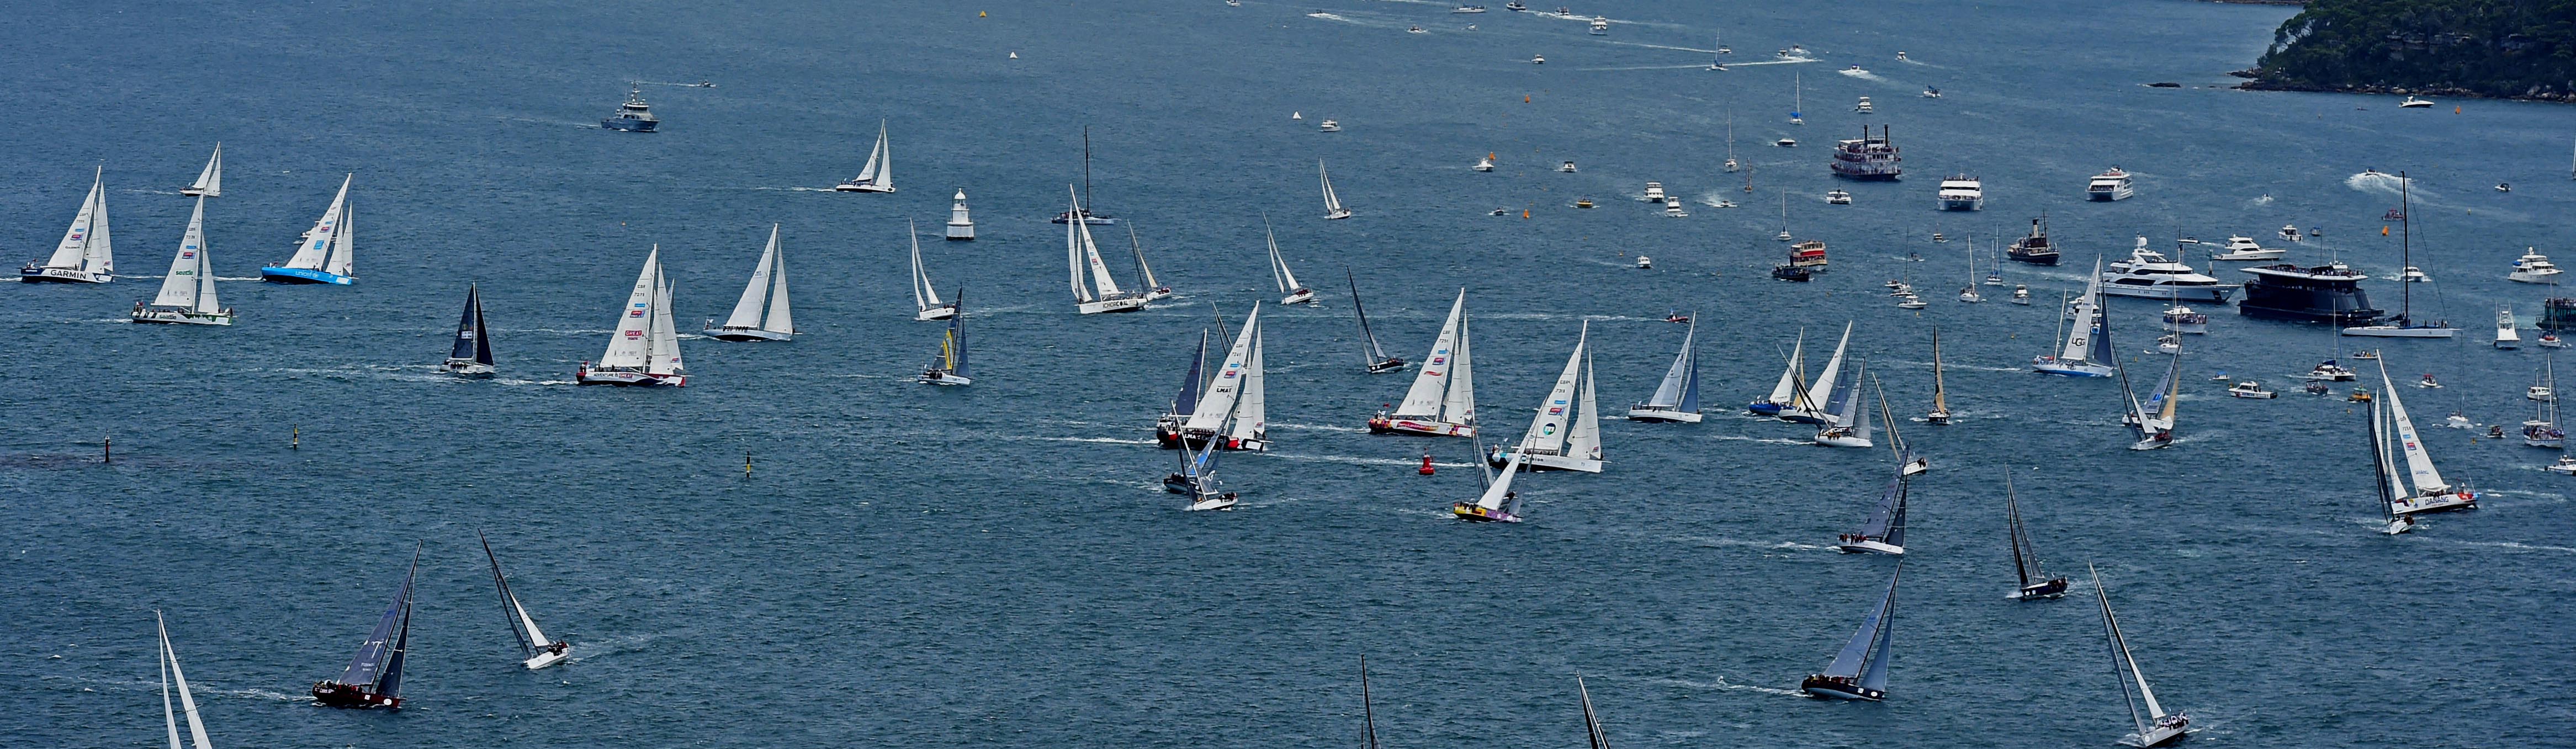 Race 5 Day 1: Fleet endures challenging first night on RSHYR